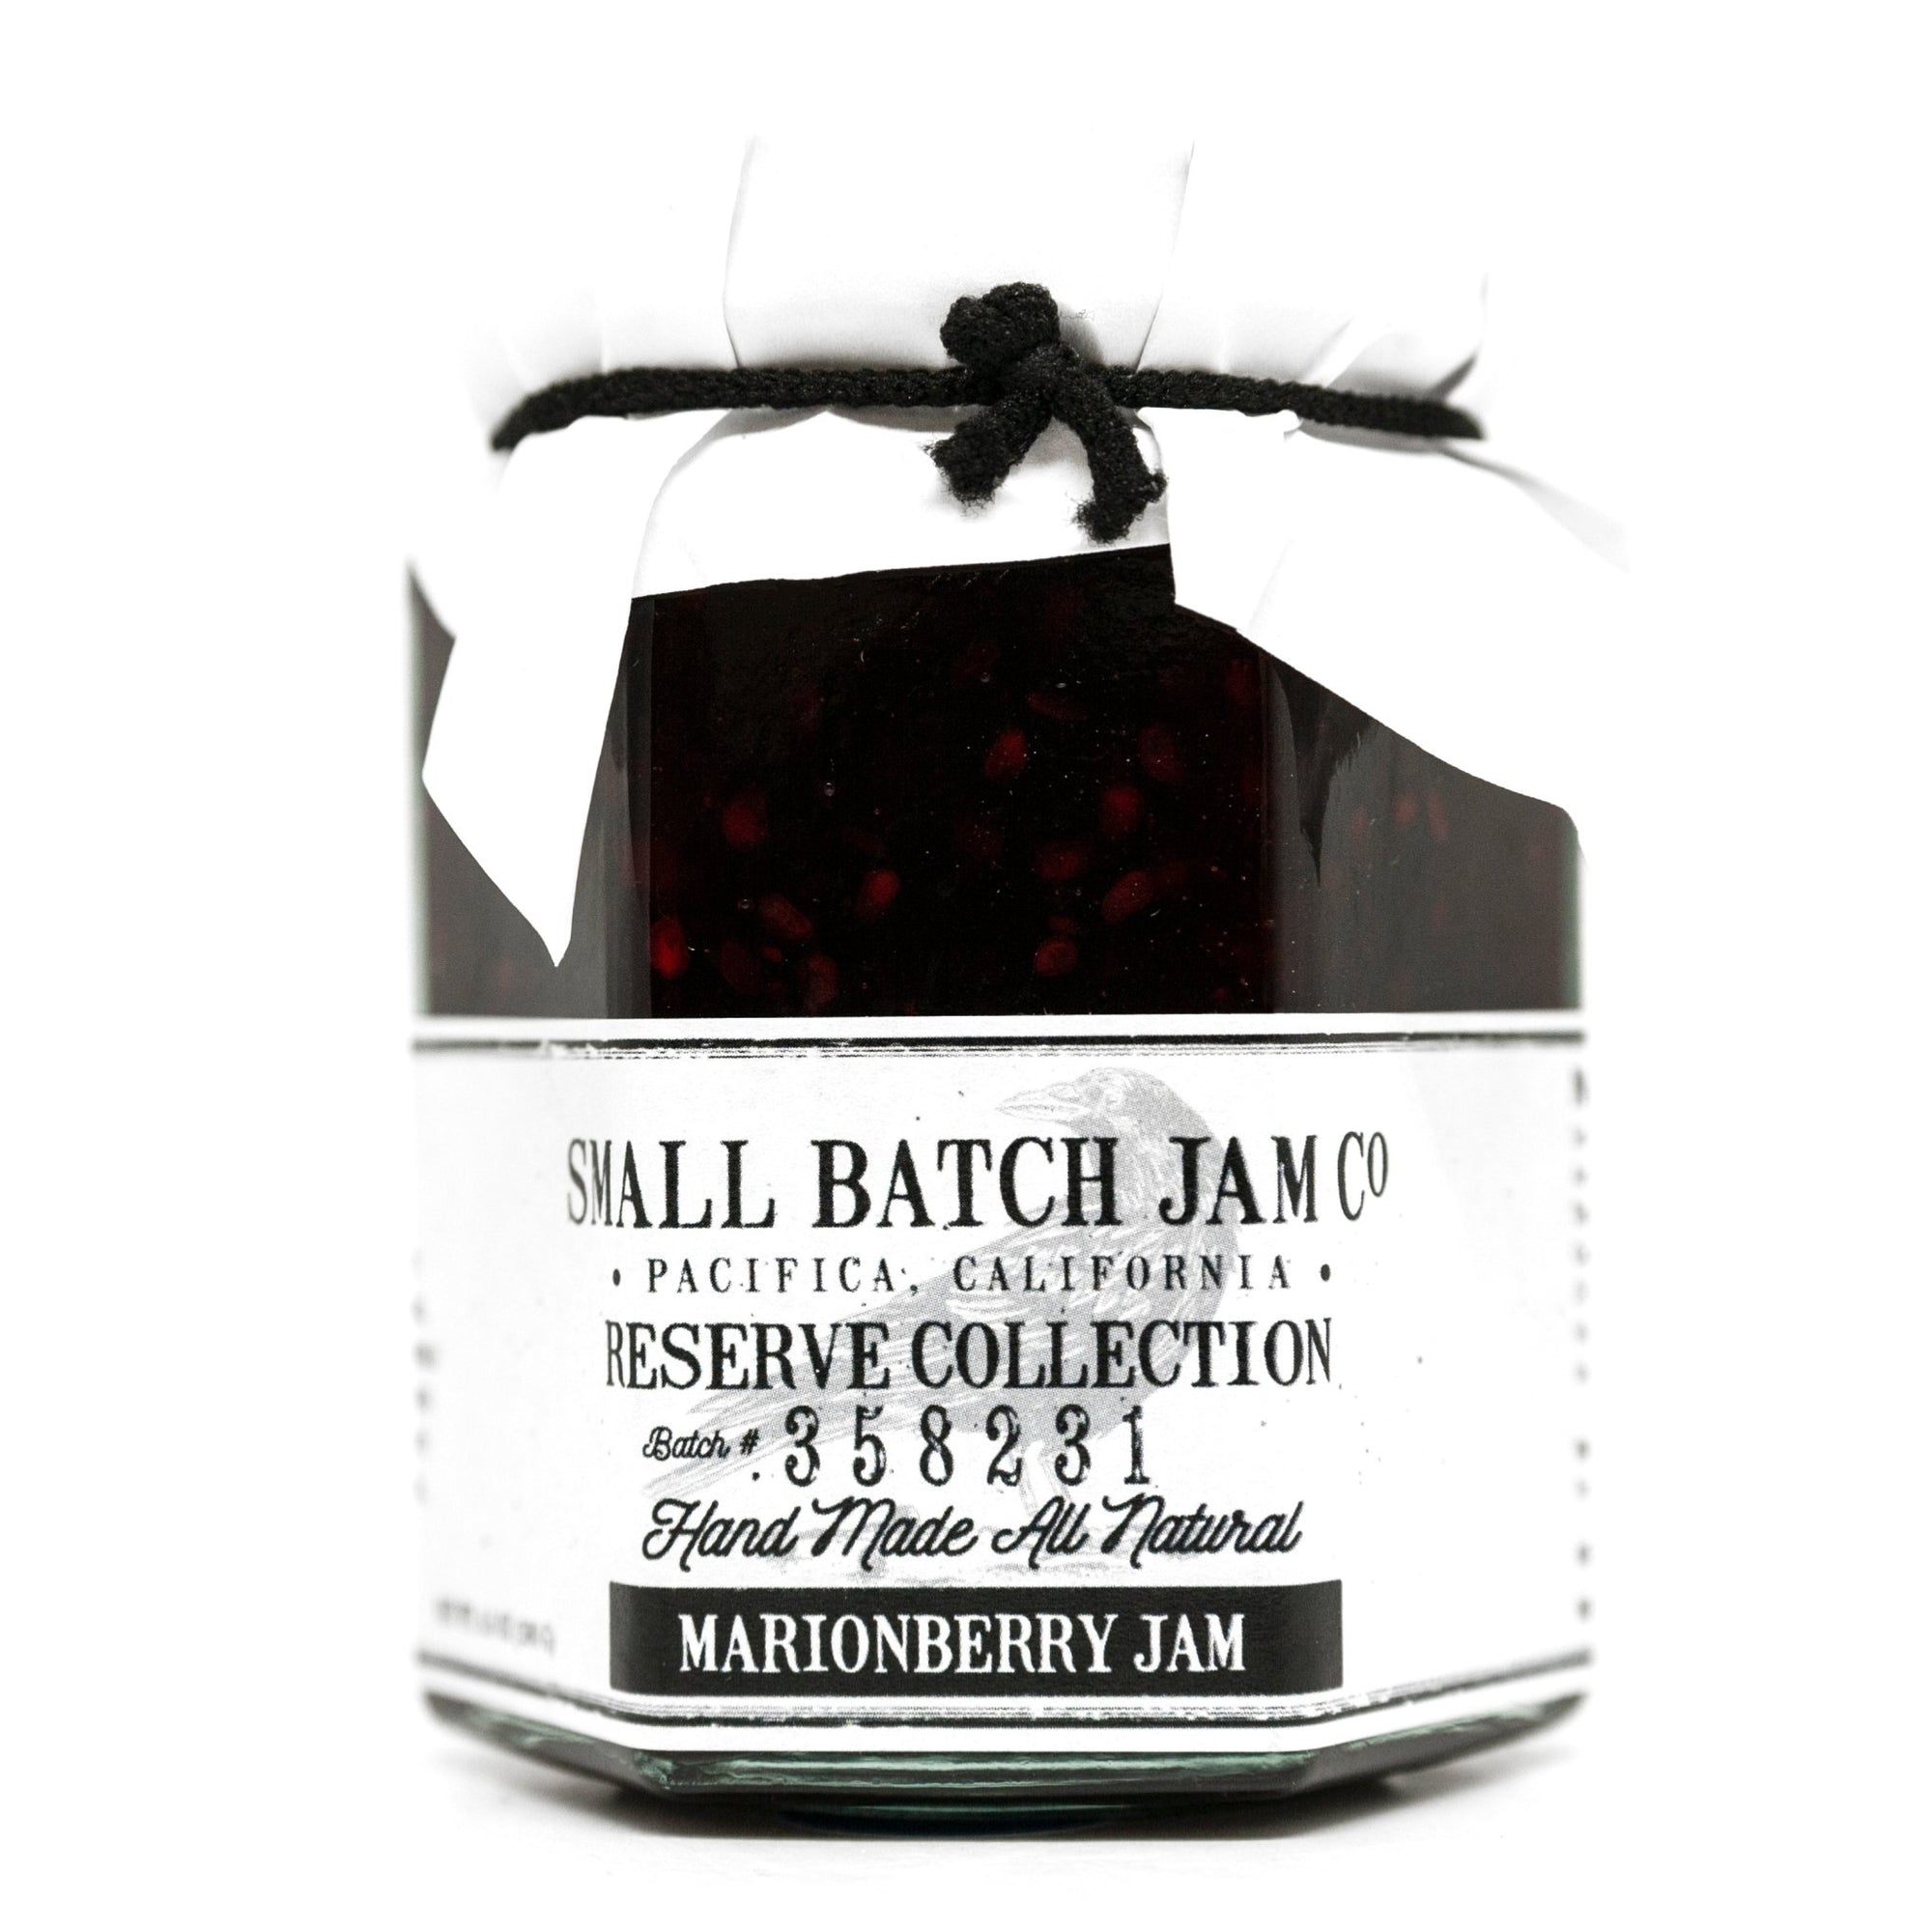 Marionberry Jam - Reserve Collection - Small Batch Jam Co